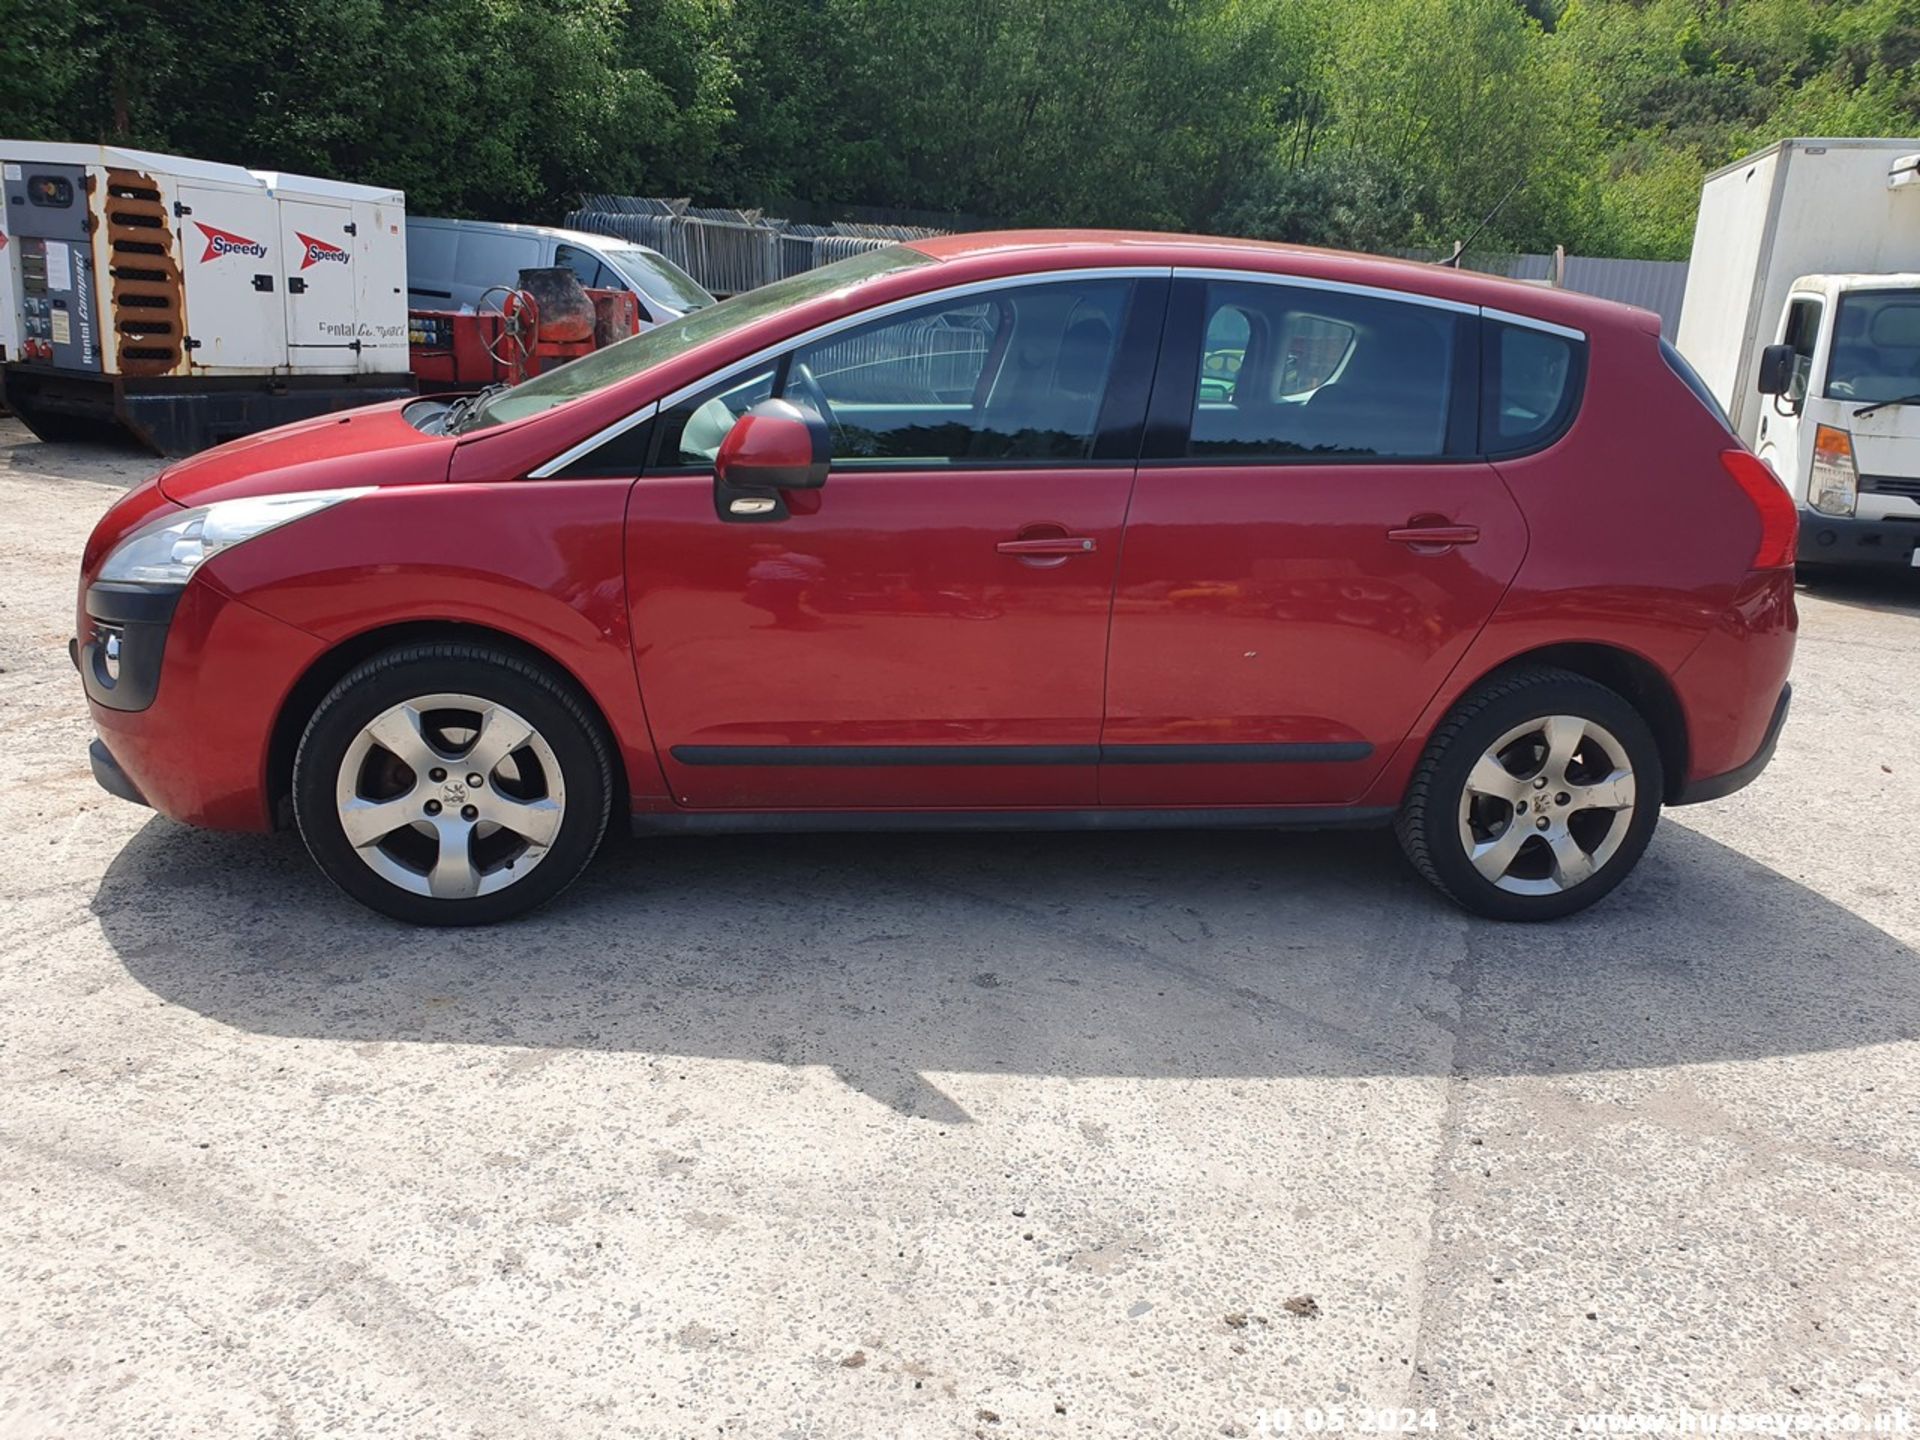 11/61 PEUGEOT 3008 SPORT E-HDI S-A - 1560cc 5dr Hatchback (Red, 89k) - Image 19 of 49